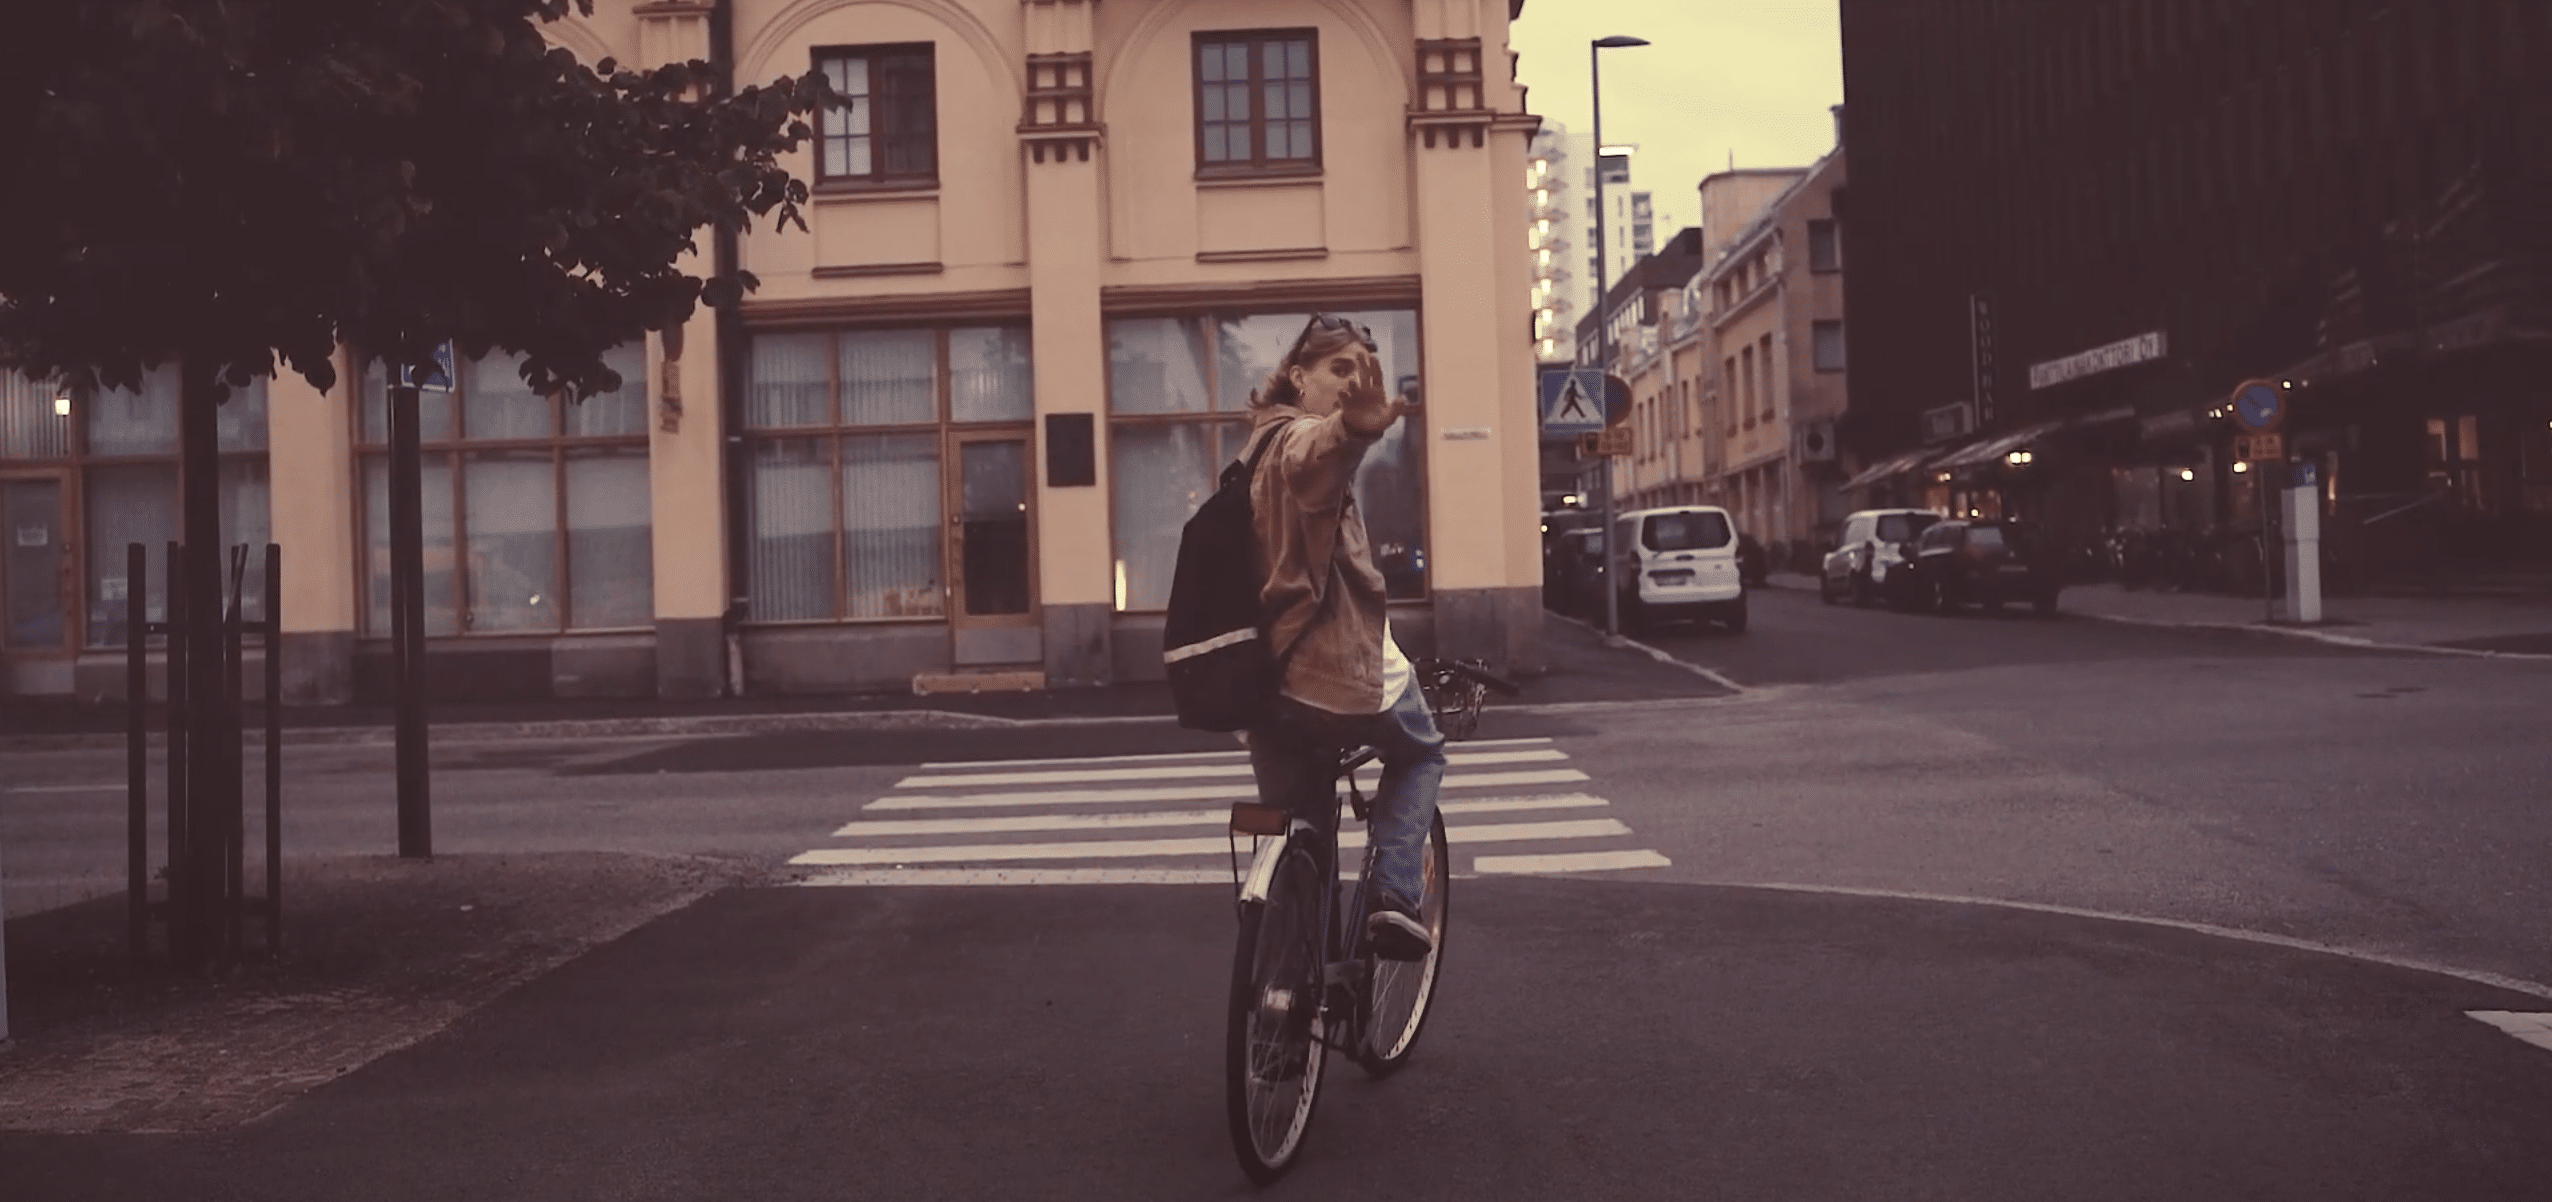 A person riding a bicycle through a city street and waving at the camera.